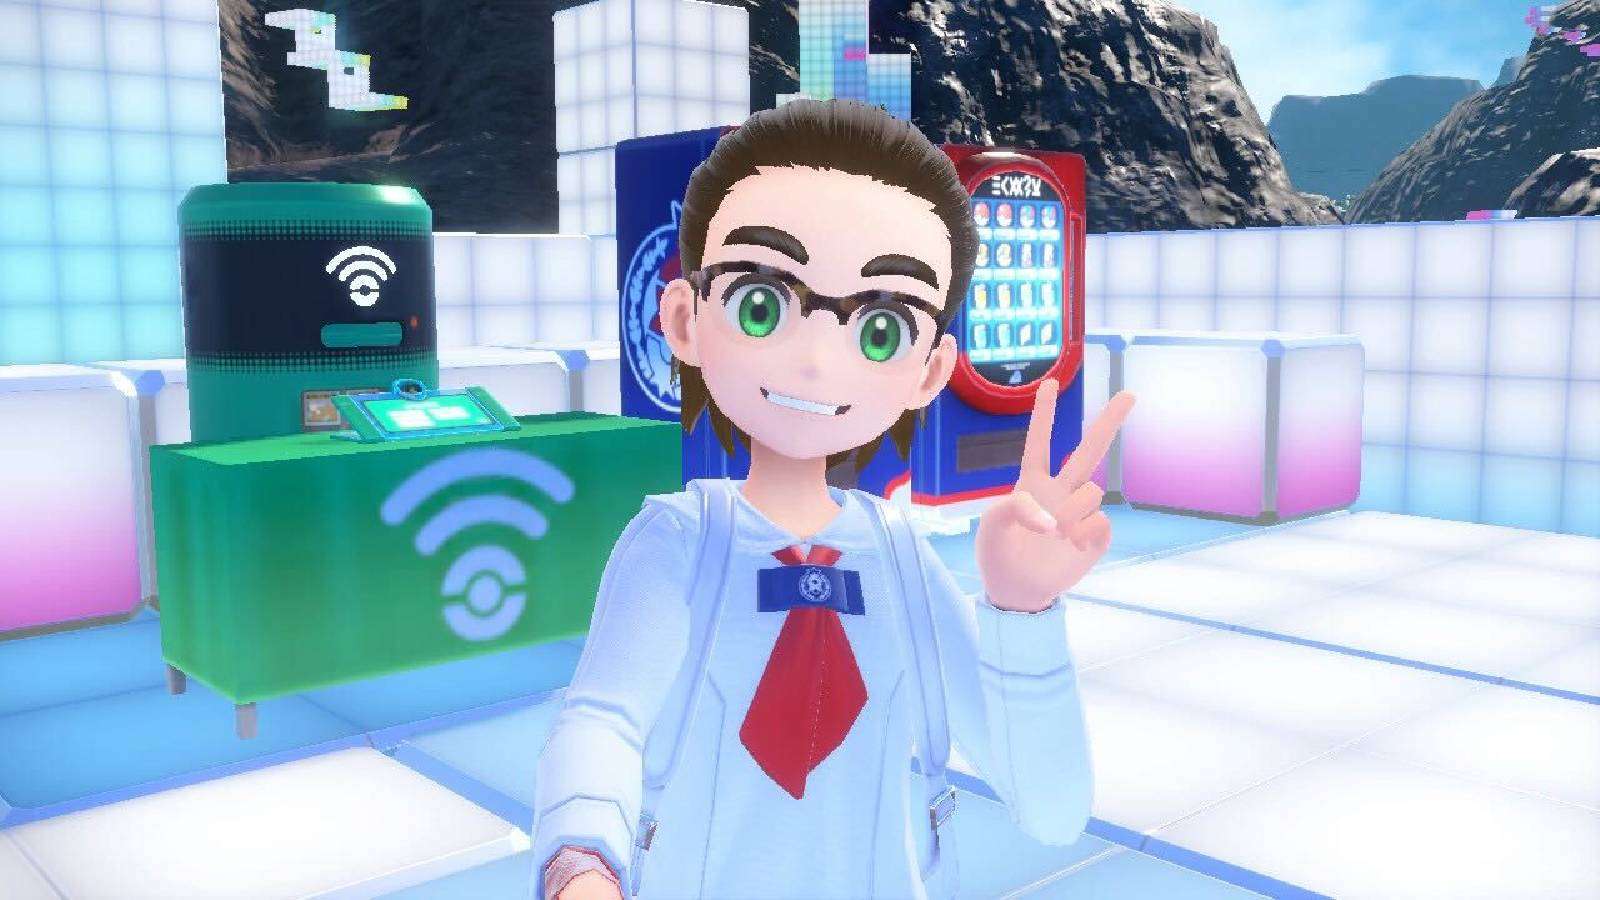 A Pokemon trainer uses the Roto Stick to take a selfie in front of a green TM crafting machine inside The Terarium, while pulling the peace sign with their left hand